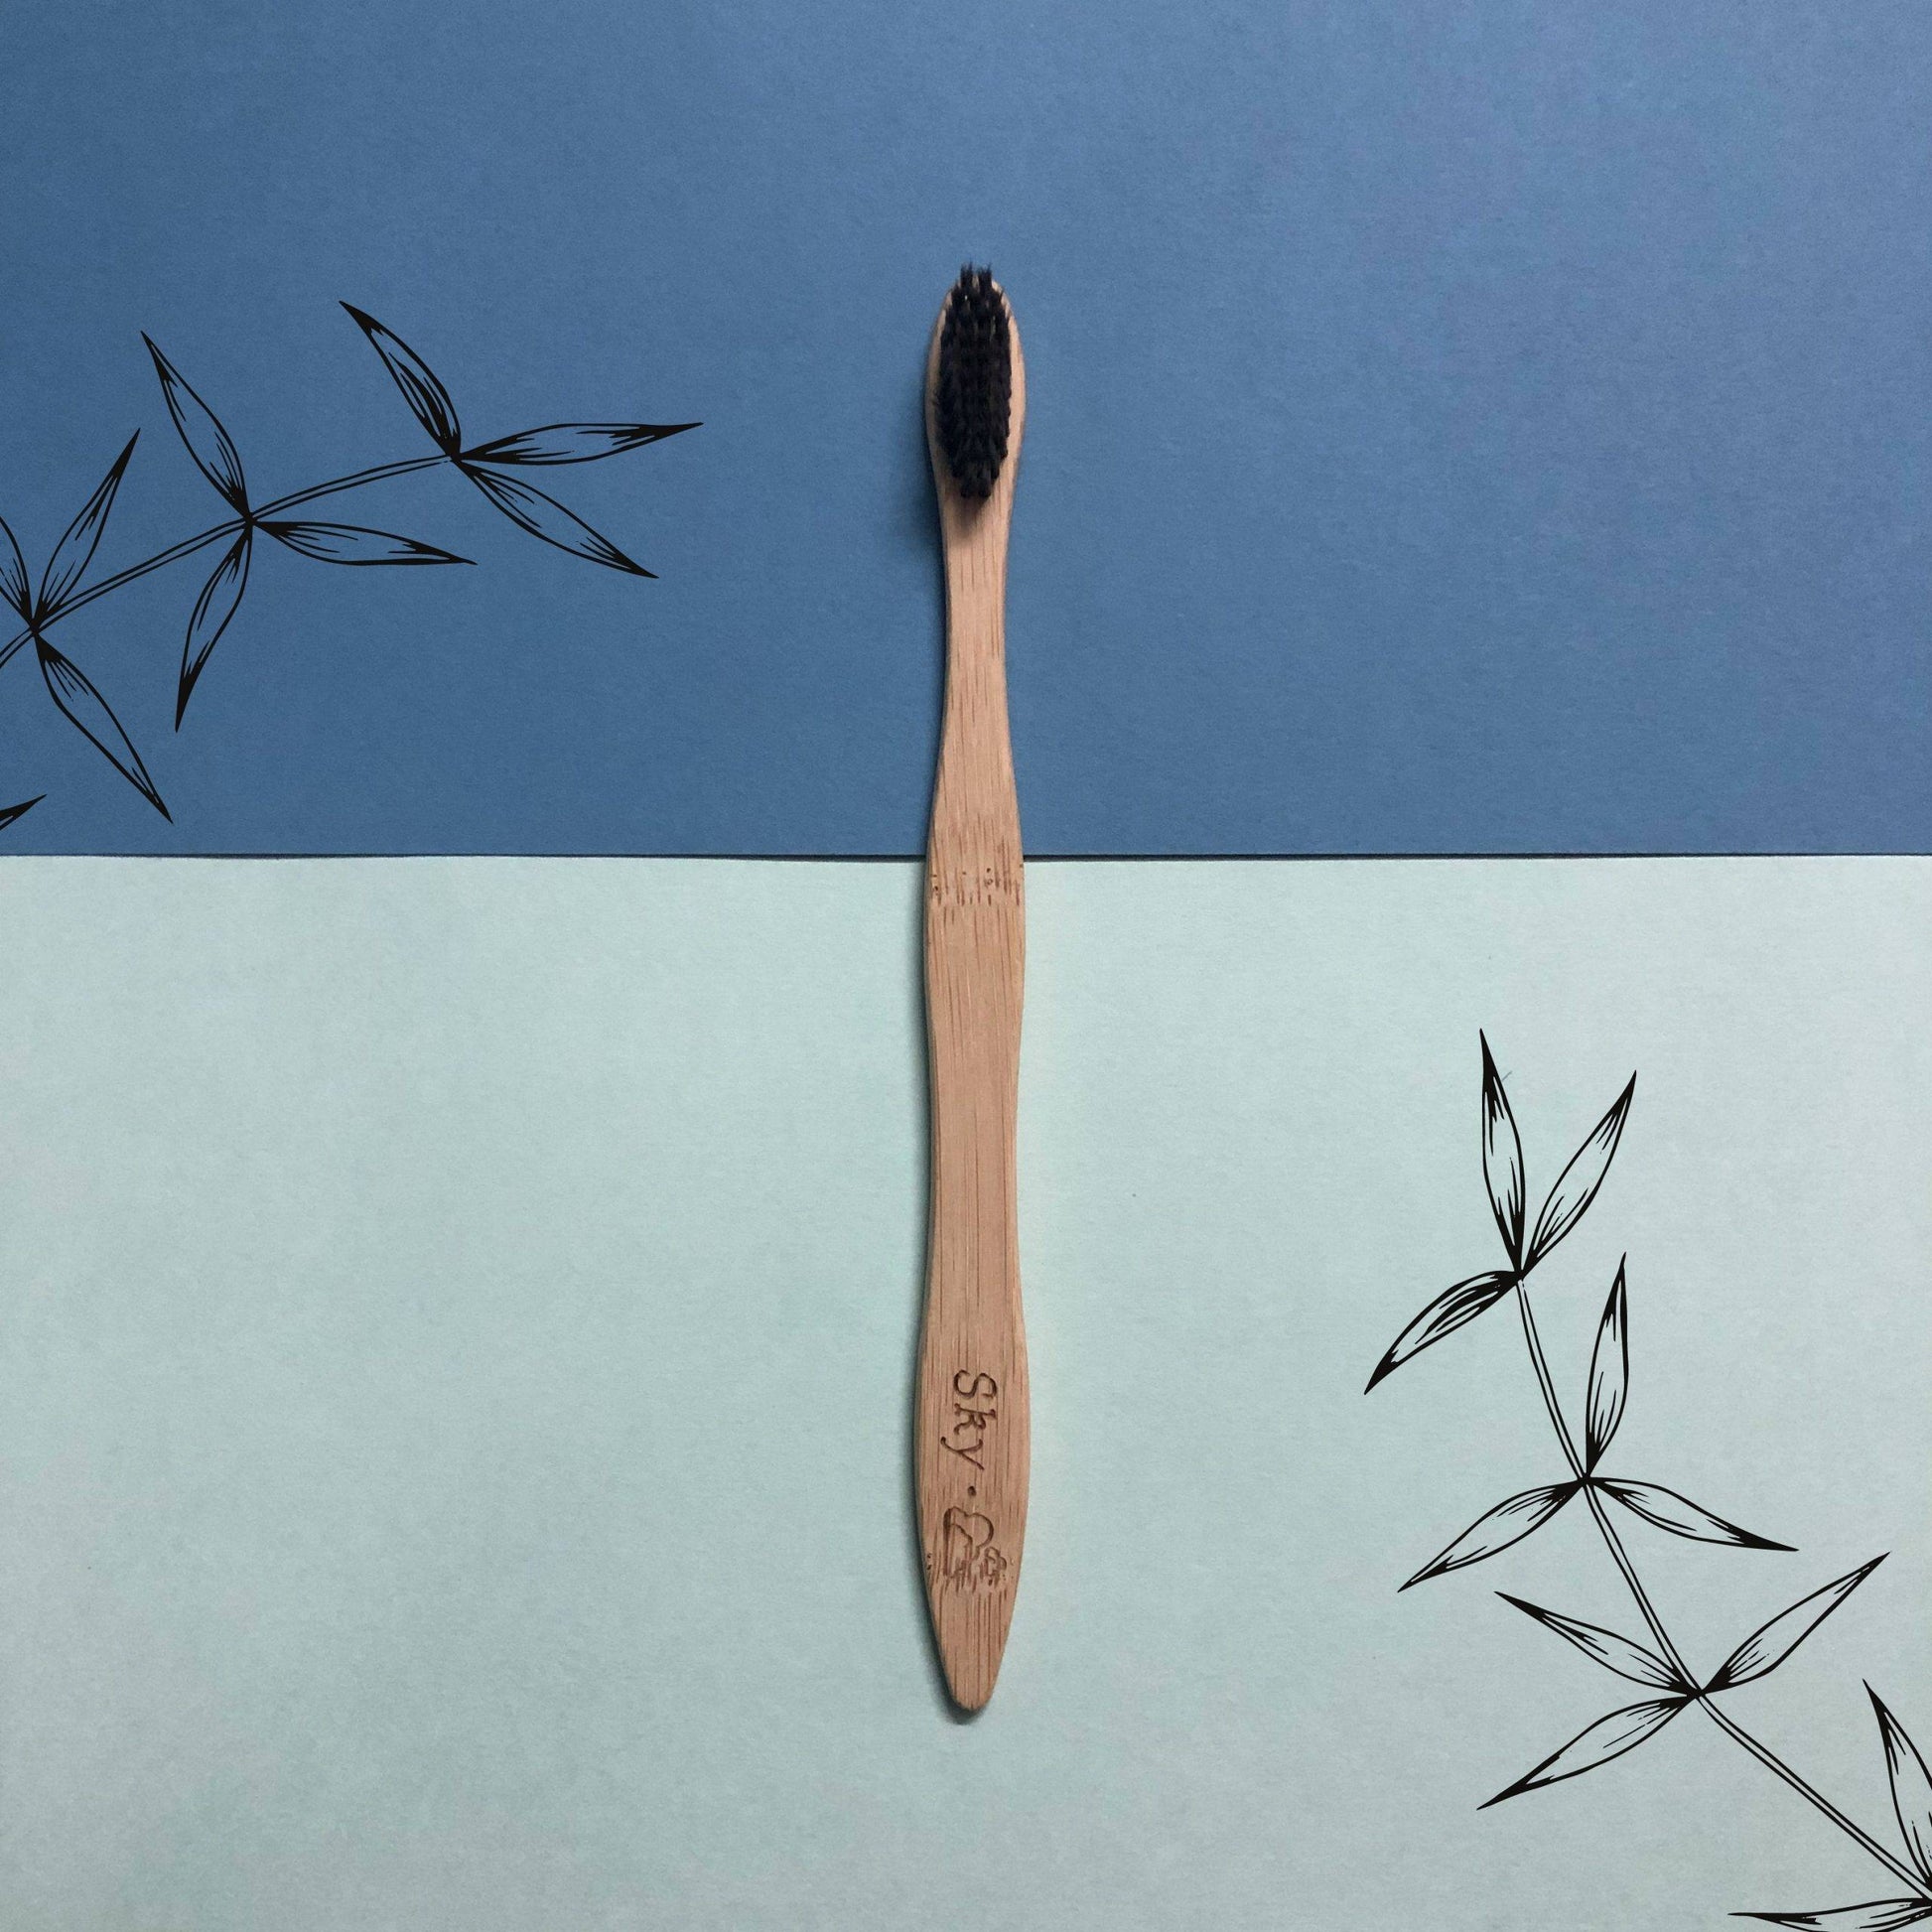 100% Biodegradable Bamboo Toothbrush with Soft Charcoal-activated Bristles - Sky